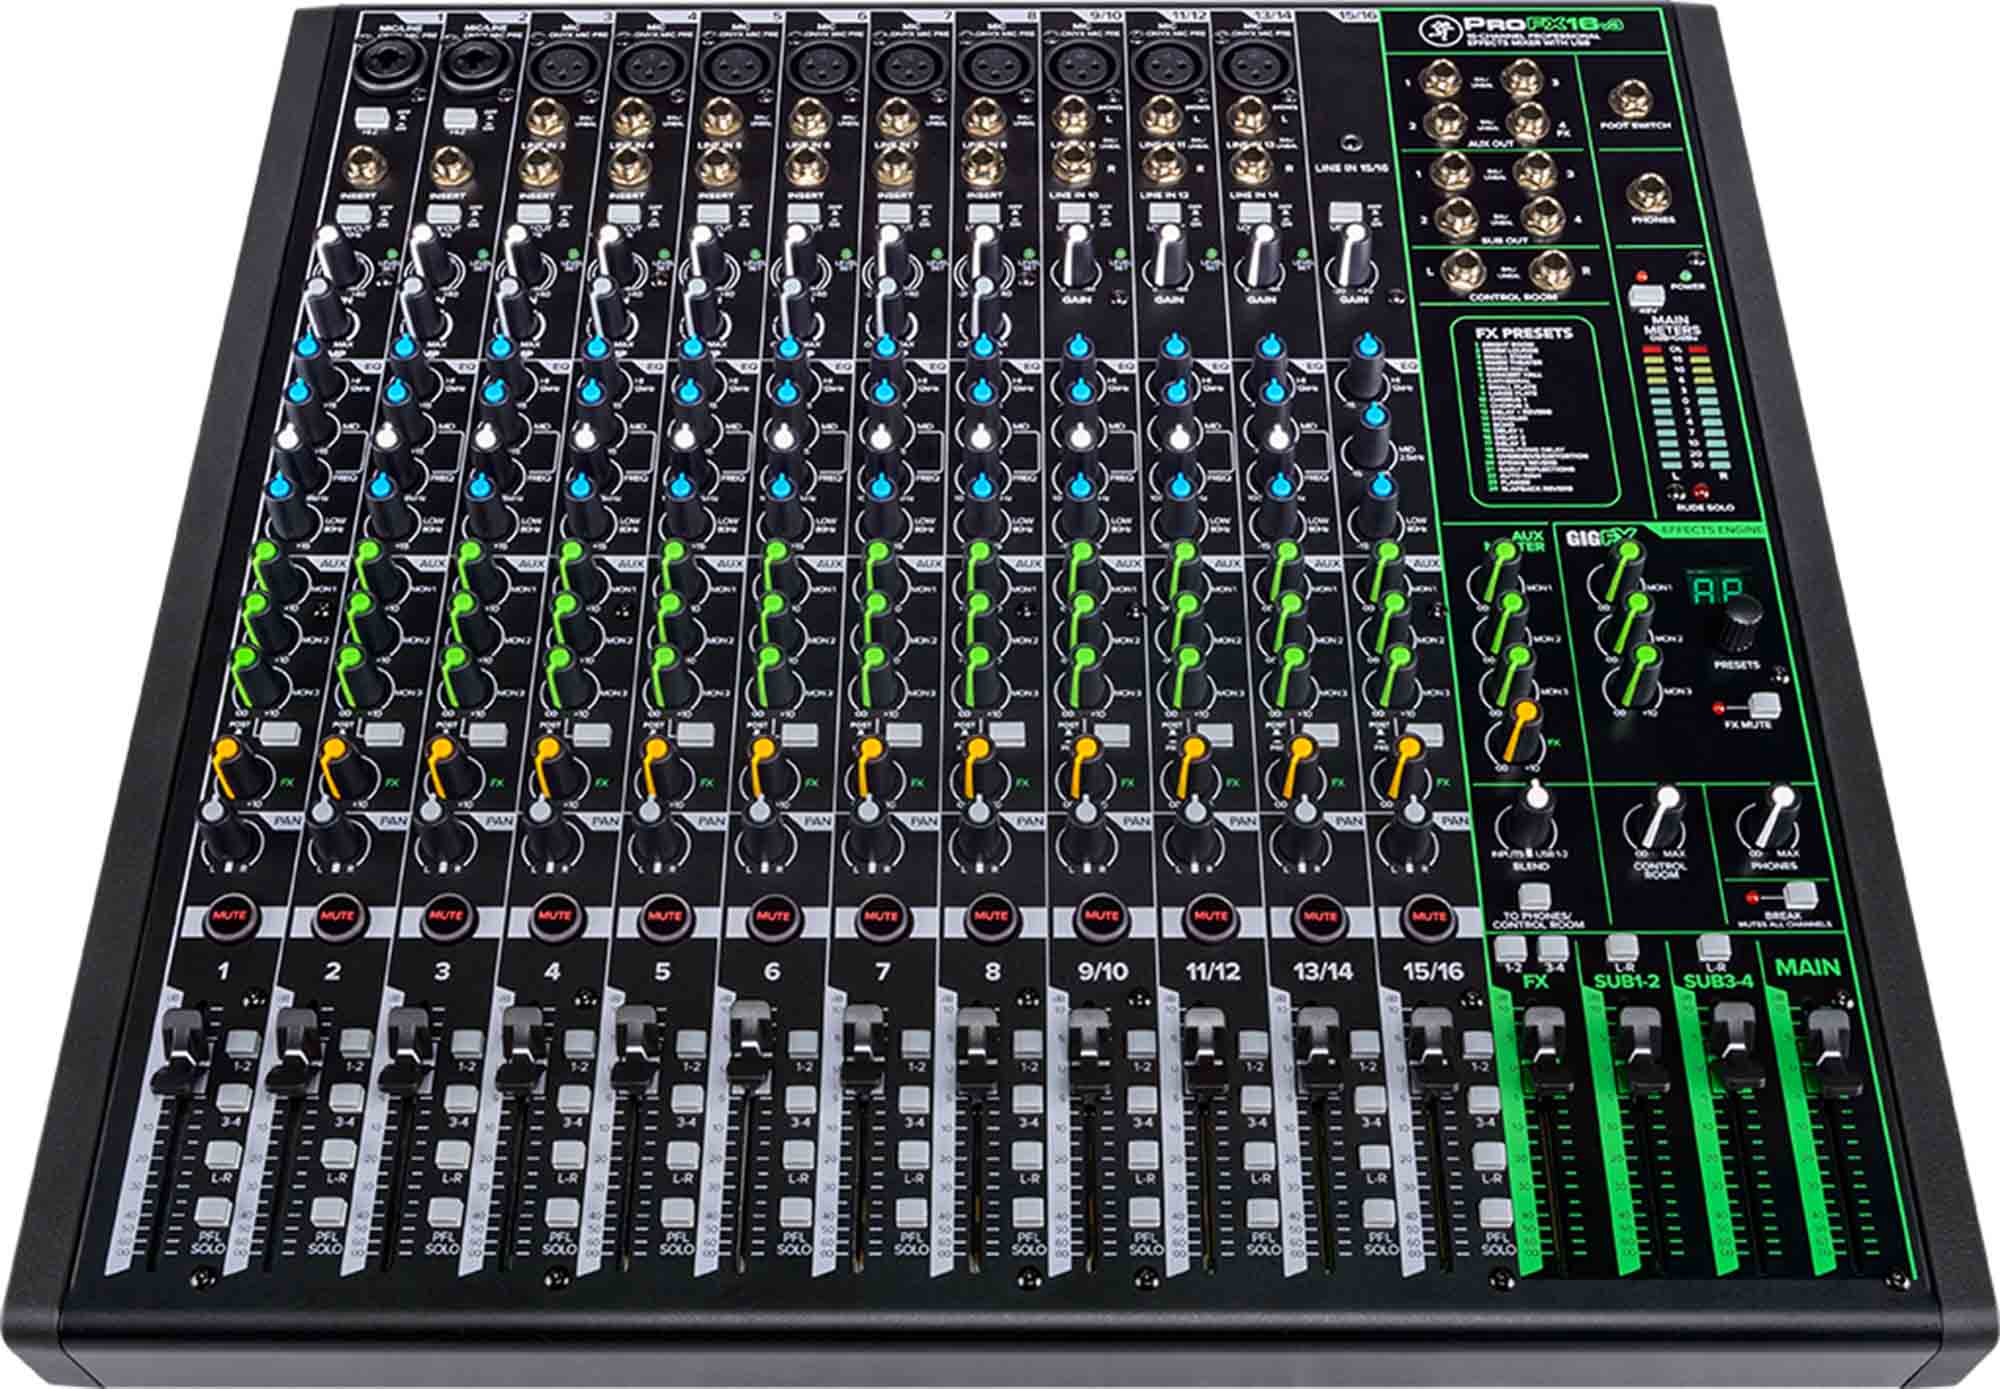 Open Box: Mackie ProFX16v3 16-Channel Professional Effects Mixer with USB - Hollywood DJ